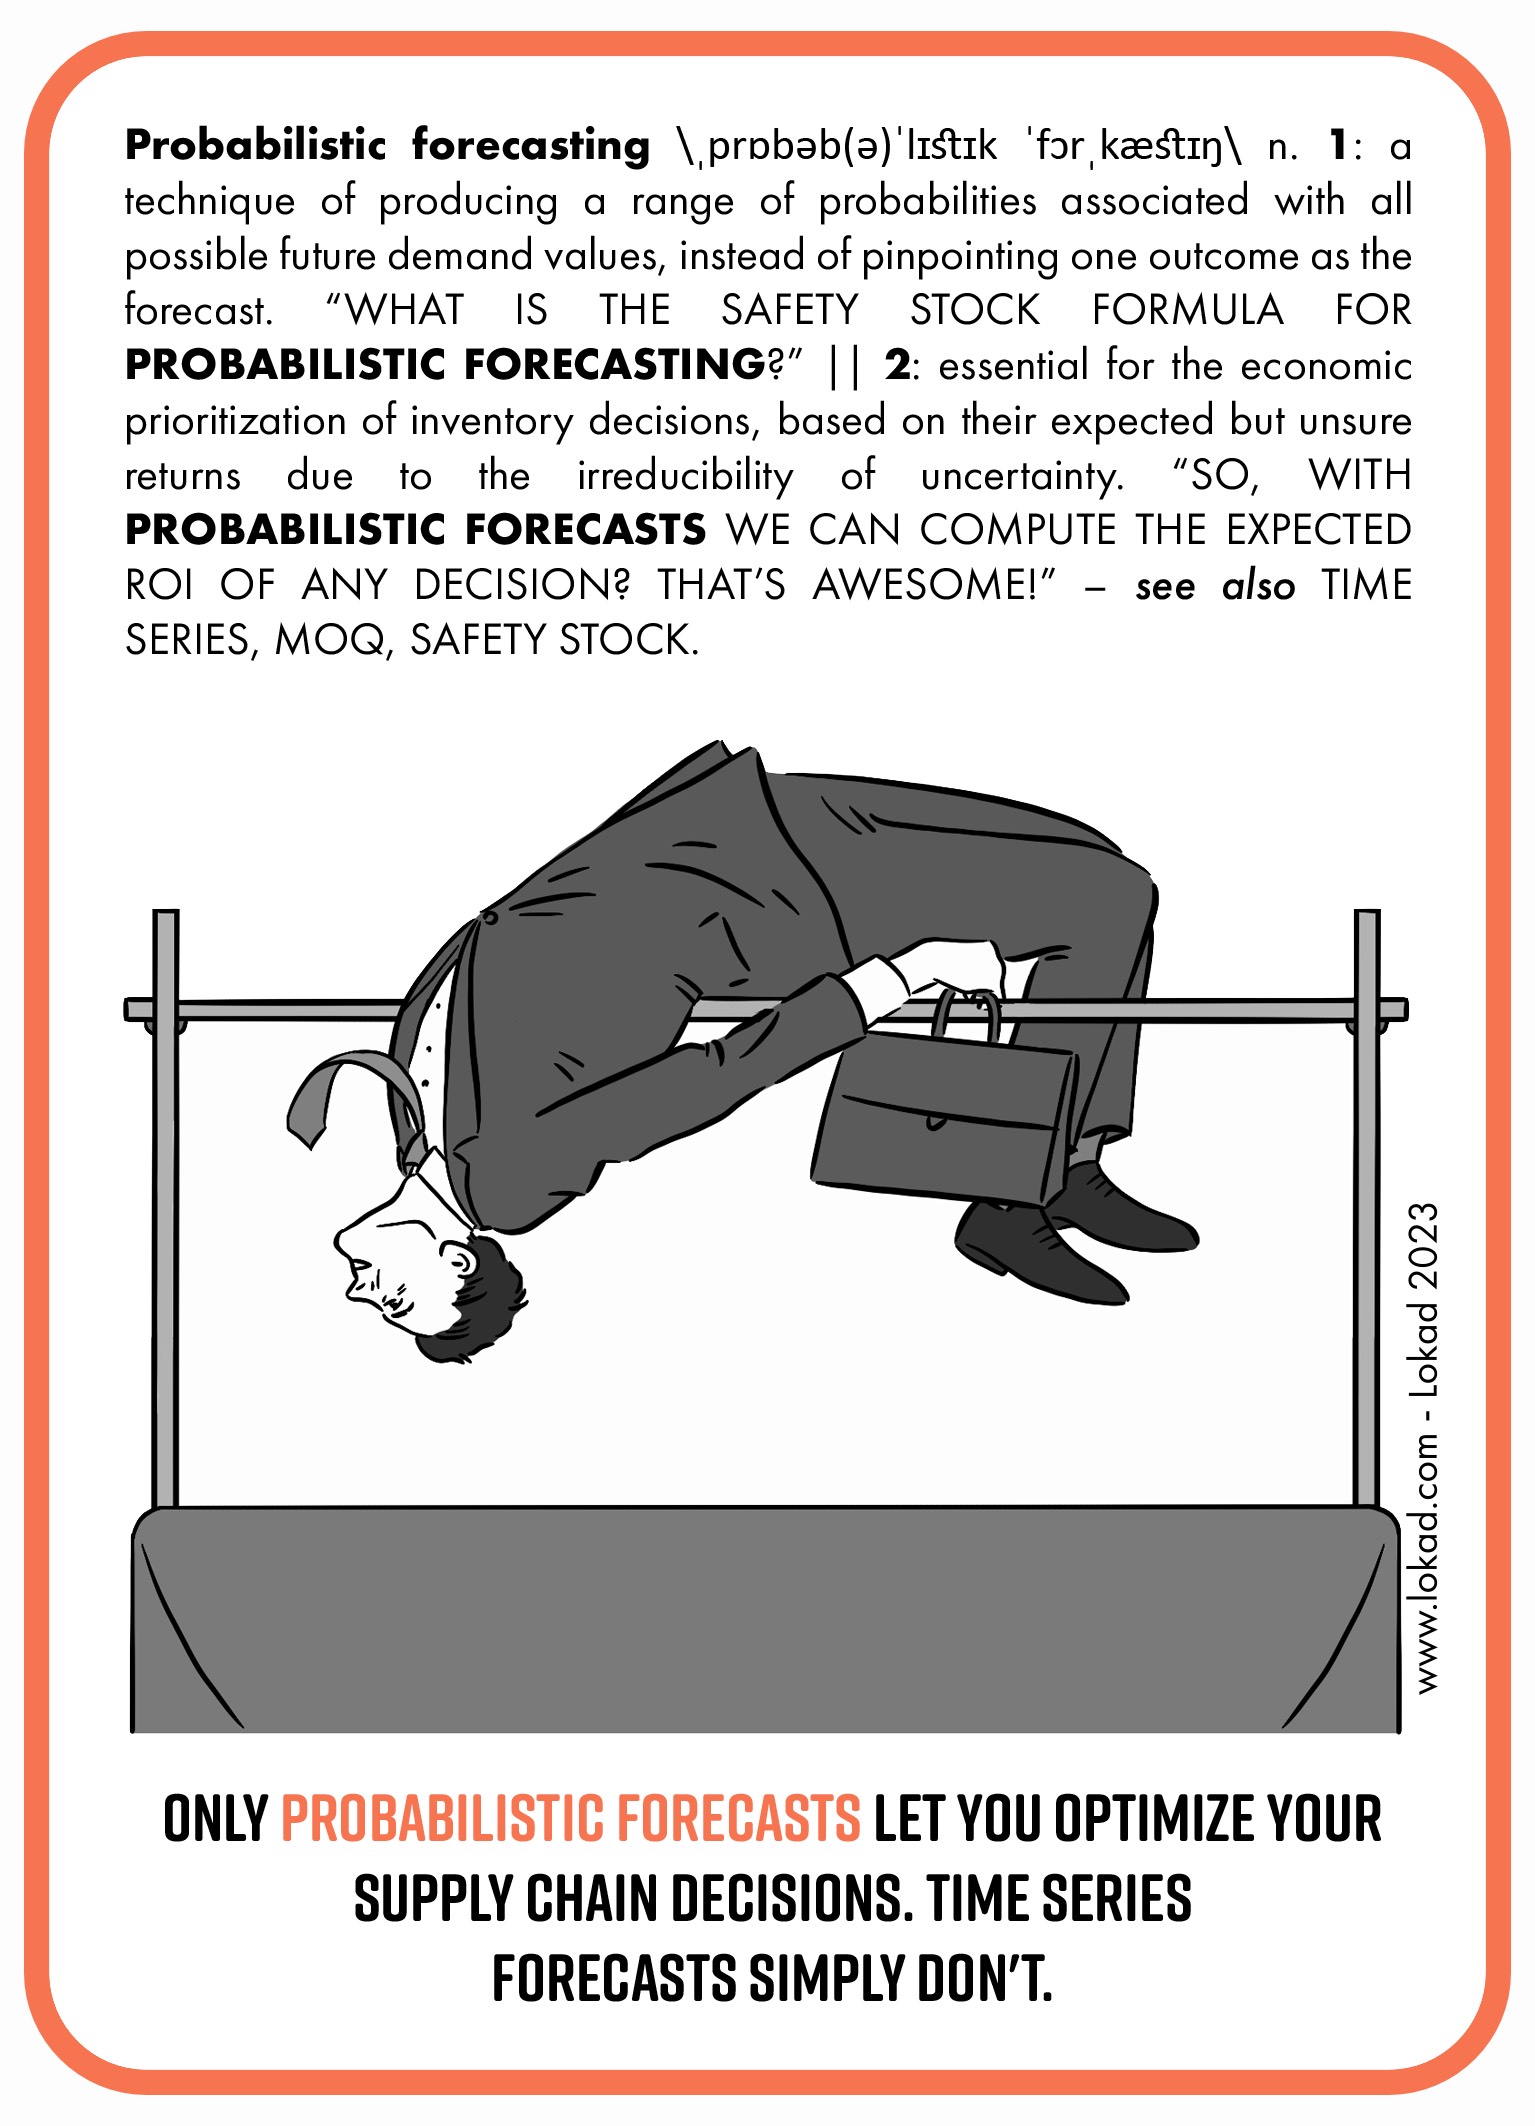 Supply chain flashcard on probabilistic forecasting. It is a technique of producing a range of probabilities associated with all possible future demand values, instead of pinpointing one outcome as the forecast. What is the safety stock formula for probabilistic forecasting? It is essential for the economic prioritization of inventory decisions, based on their expected but unsure returns due to the irreducibility of uncertainty. So, with probabilistic forecasts we can compute the expected ROI of any decision? That's awesome! Only probabilistic forecasts let you optimize your supply chain decisions. Time series forecasts simply don't. The flashcard contains an image of a man in business suit with a suitcase making Fosbury flop.